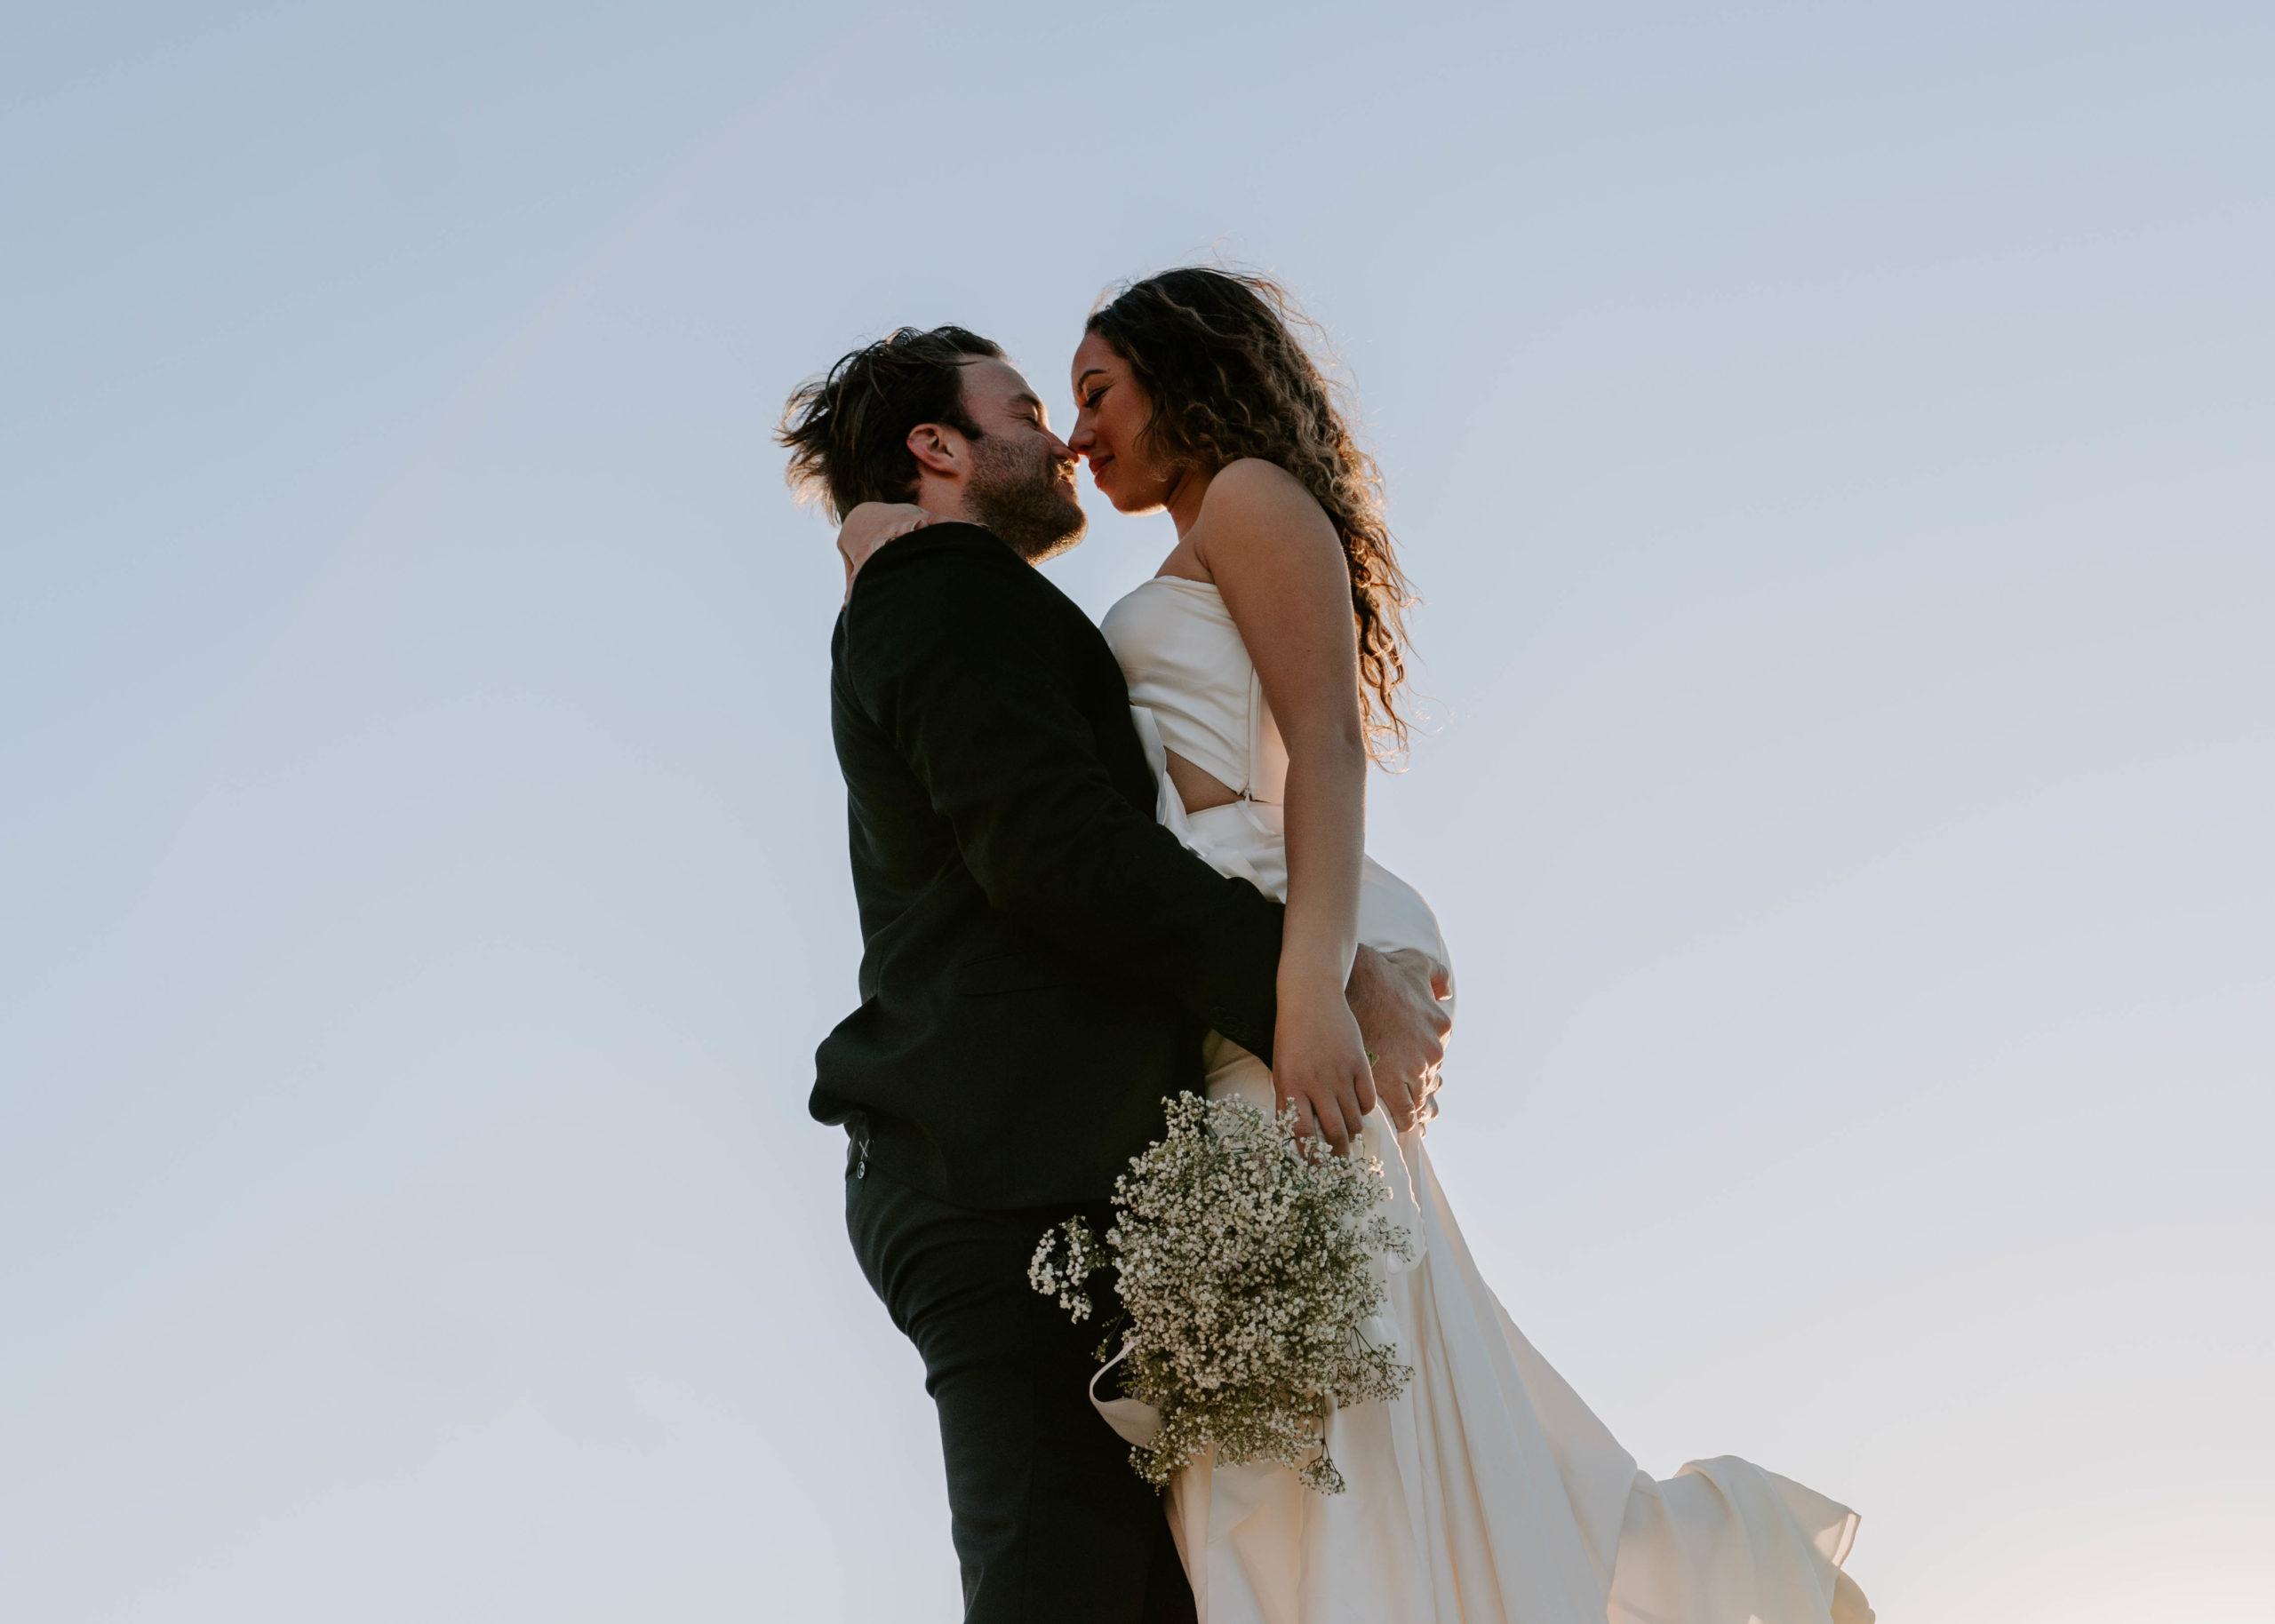 Jas and Noah were beautiful during their wedding in Joshua Tree.